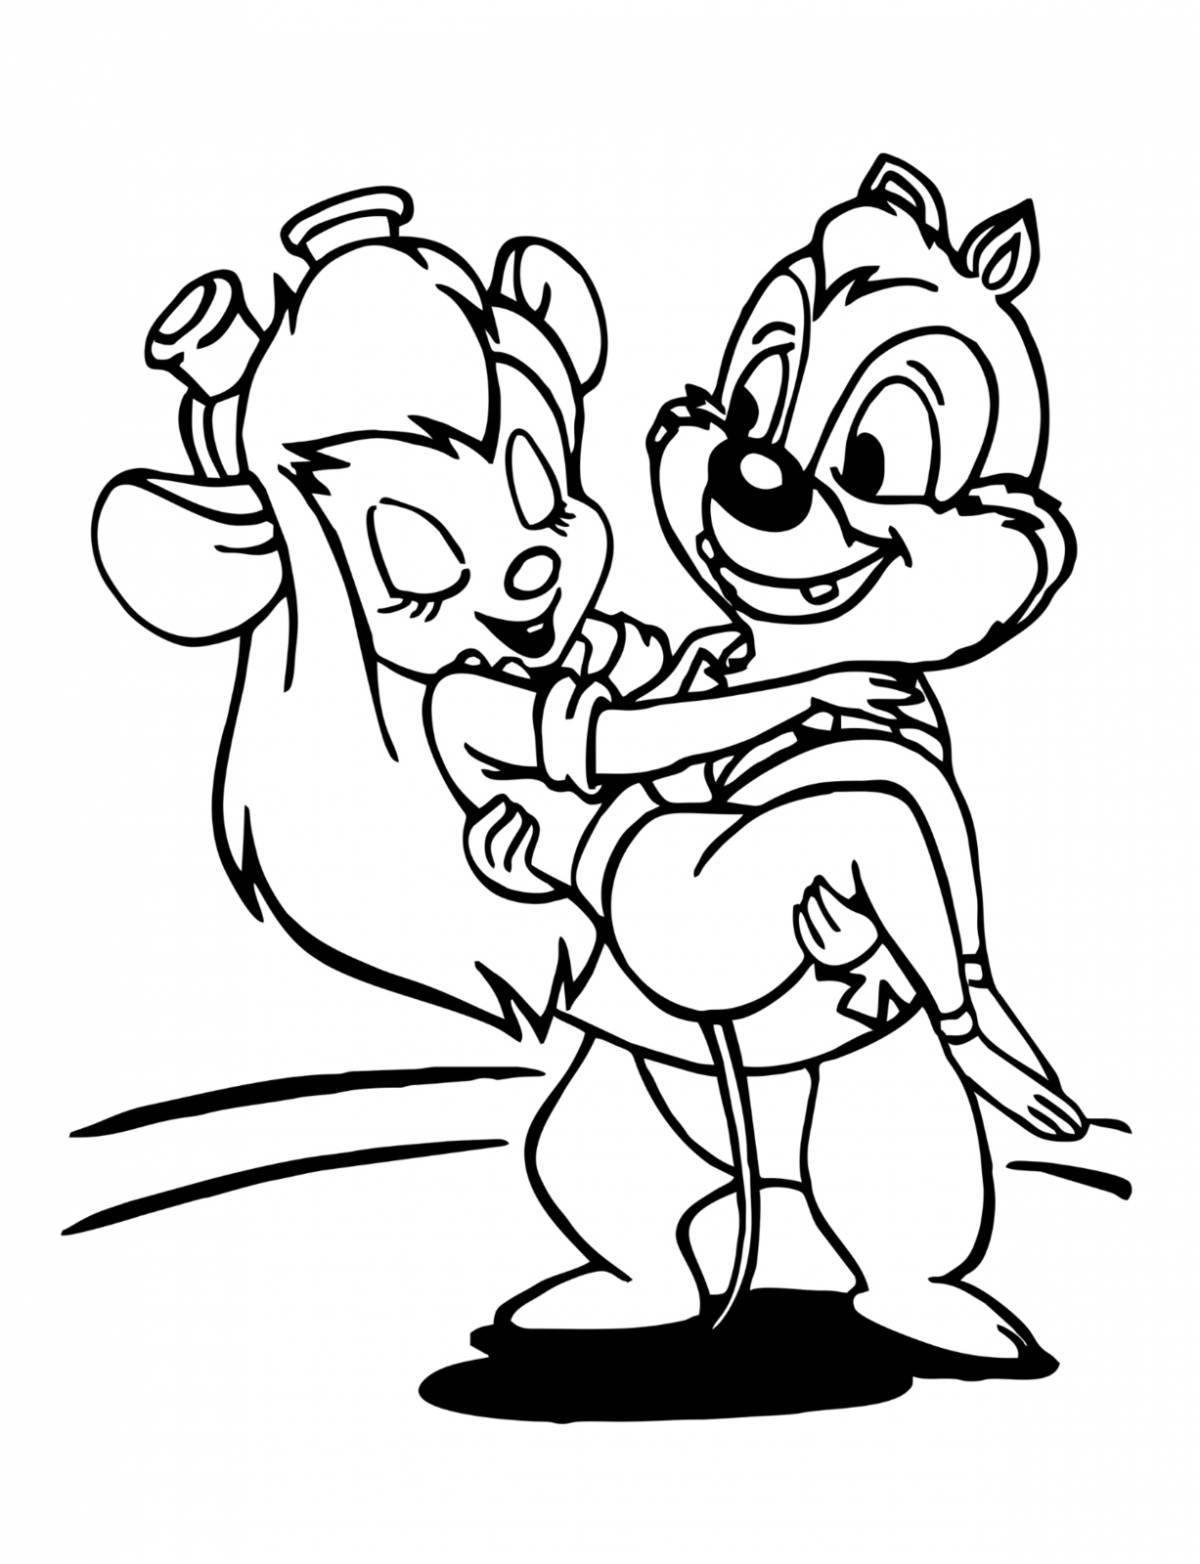 Animated chip and dale nut coloring page